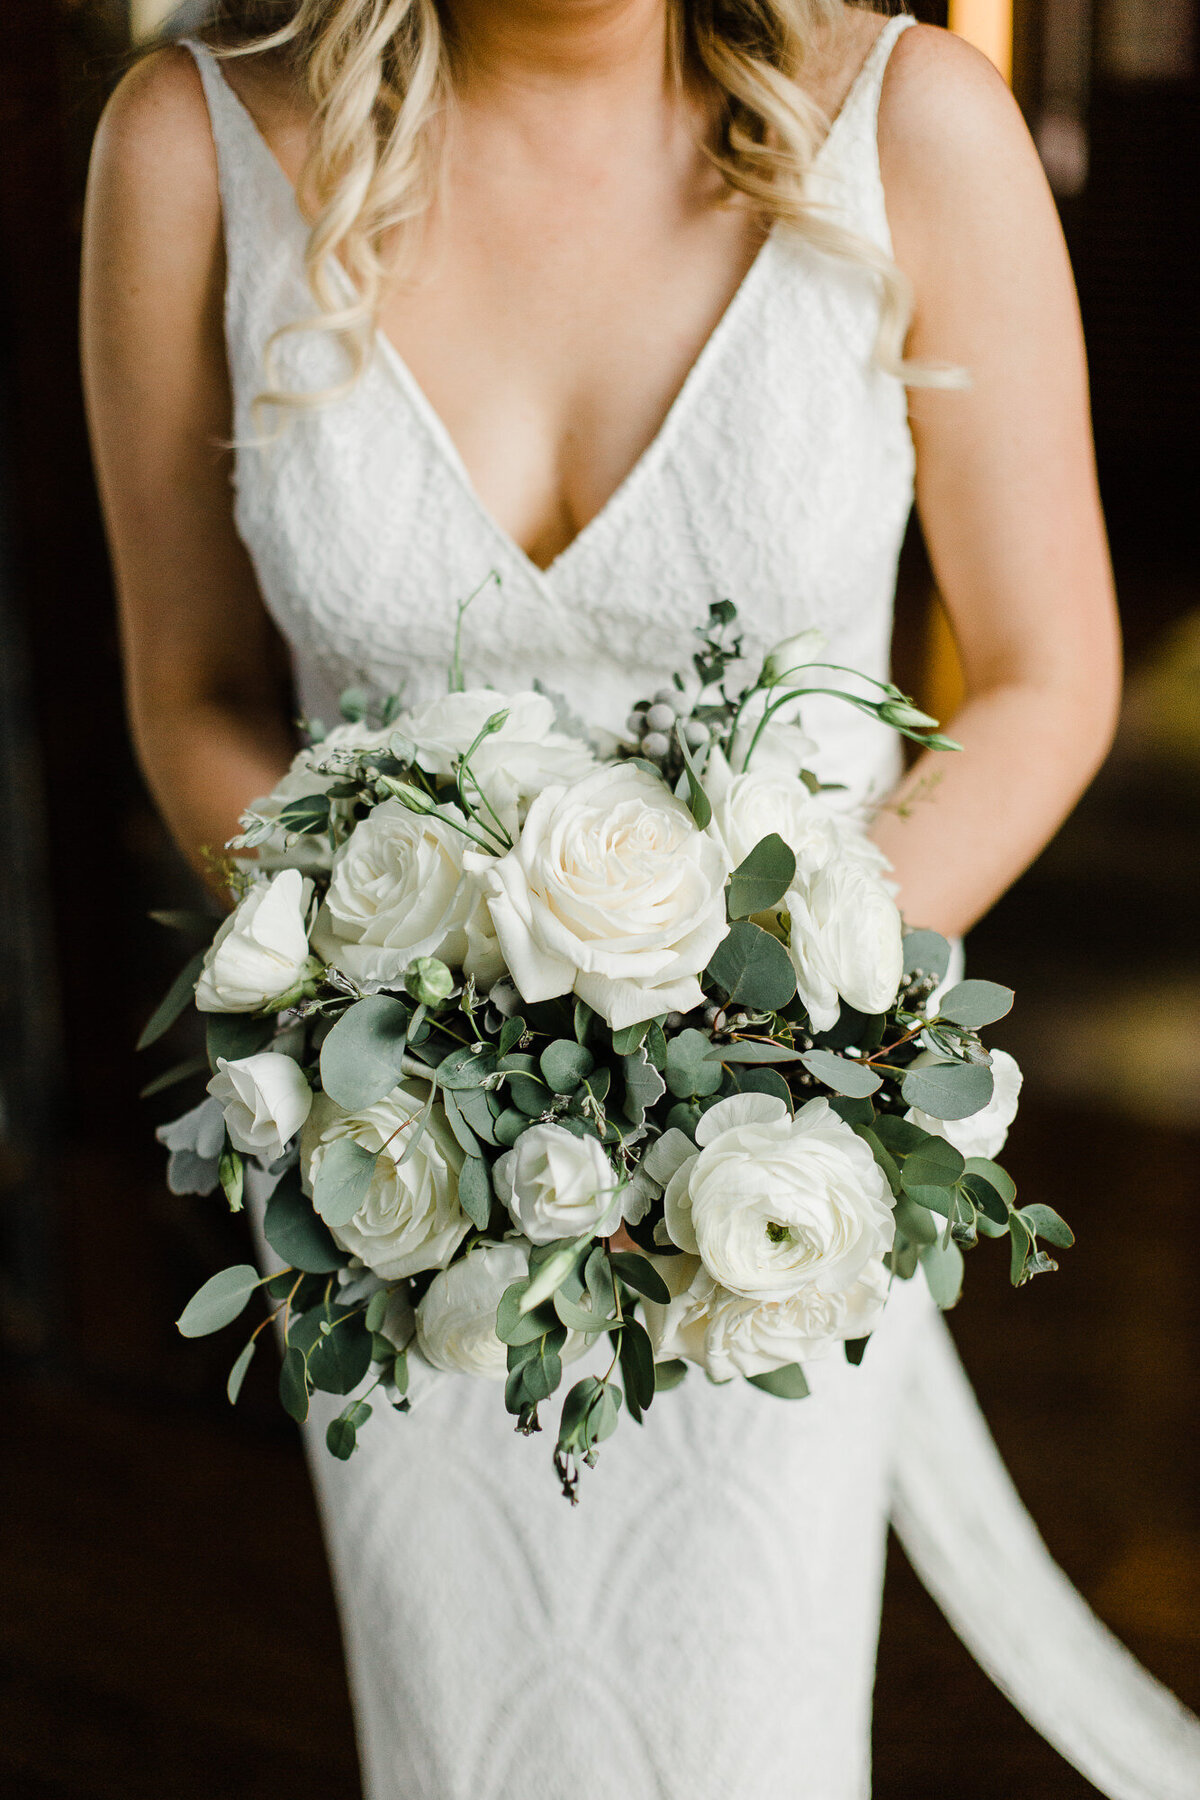 Bride carrying all white and greenery loose bouquet with white ranunculus, white lisianthus, and white roses